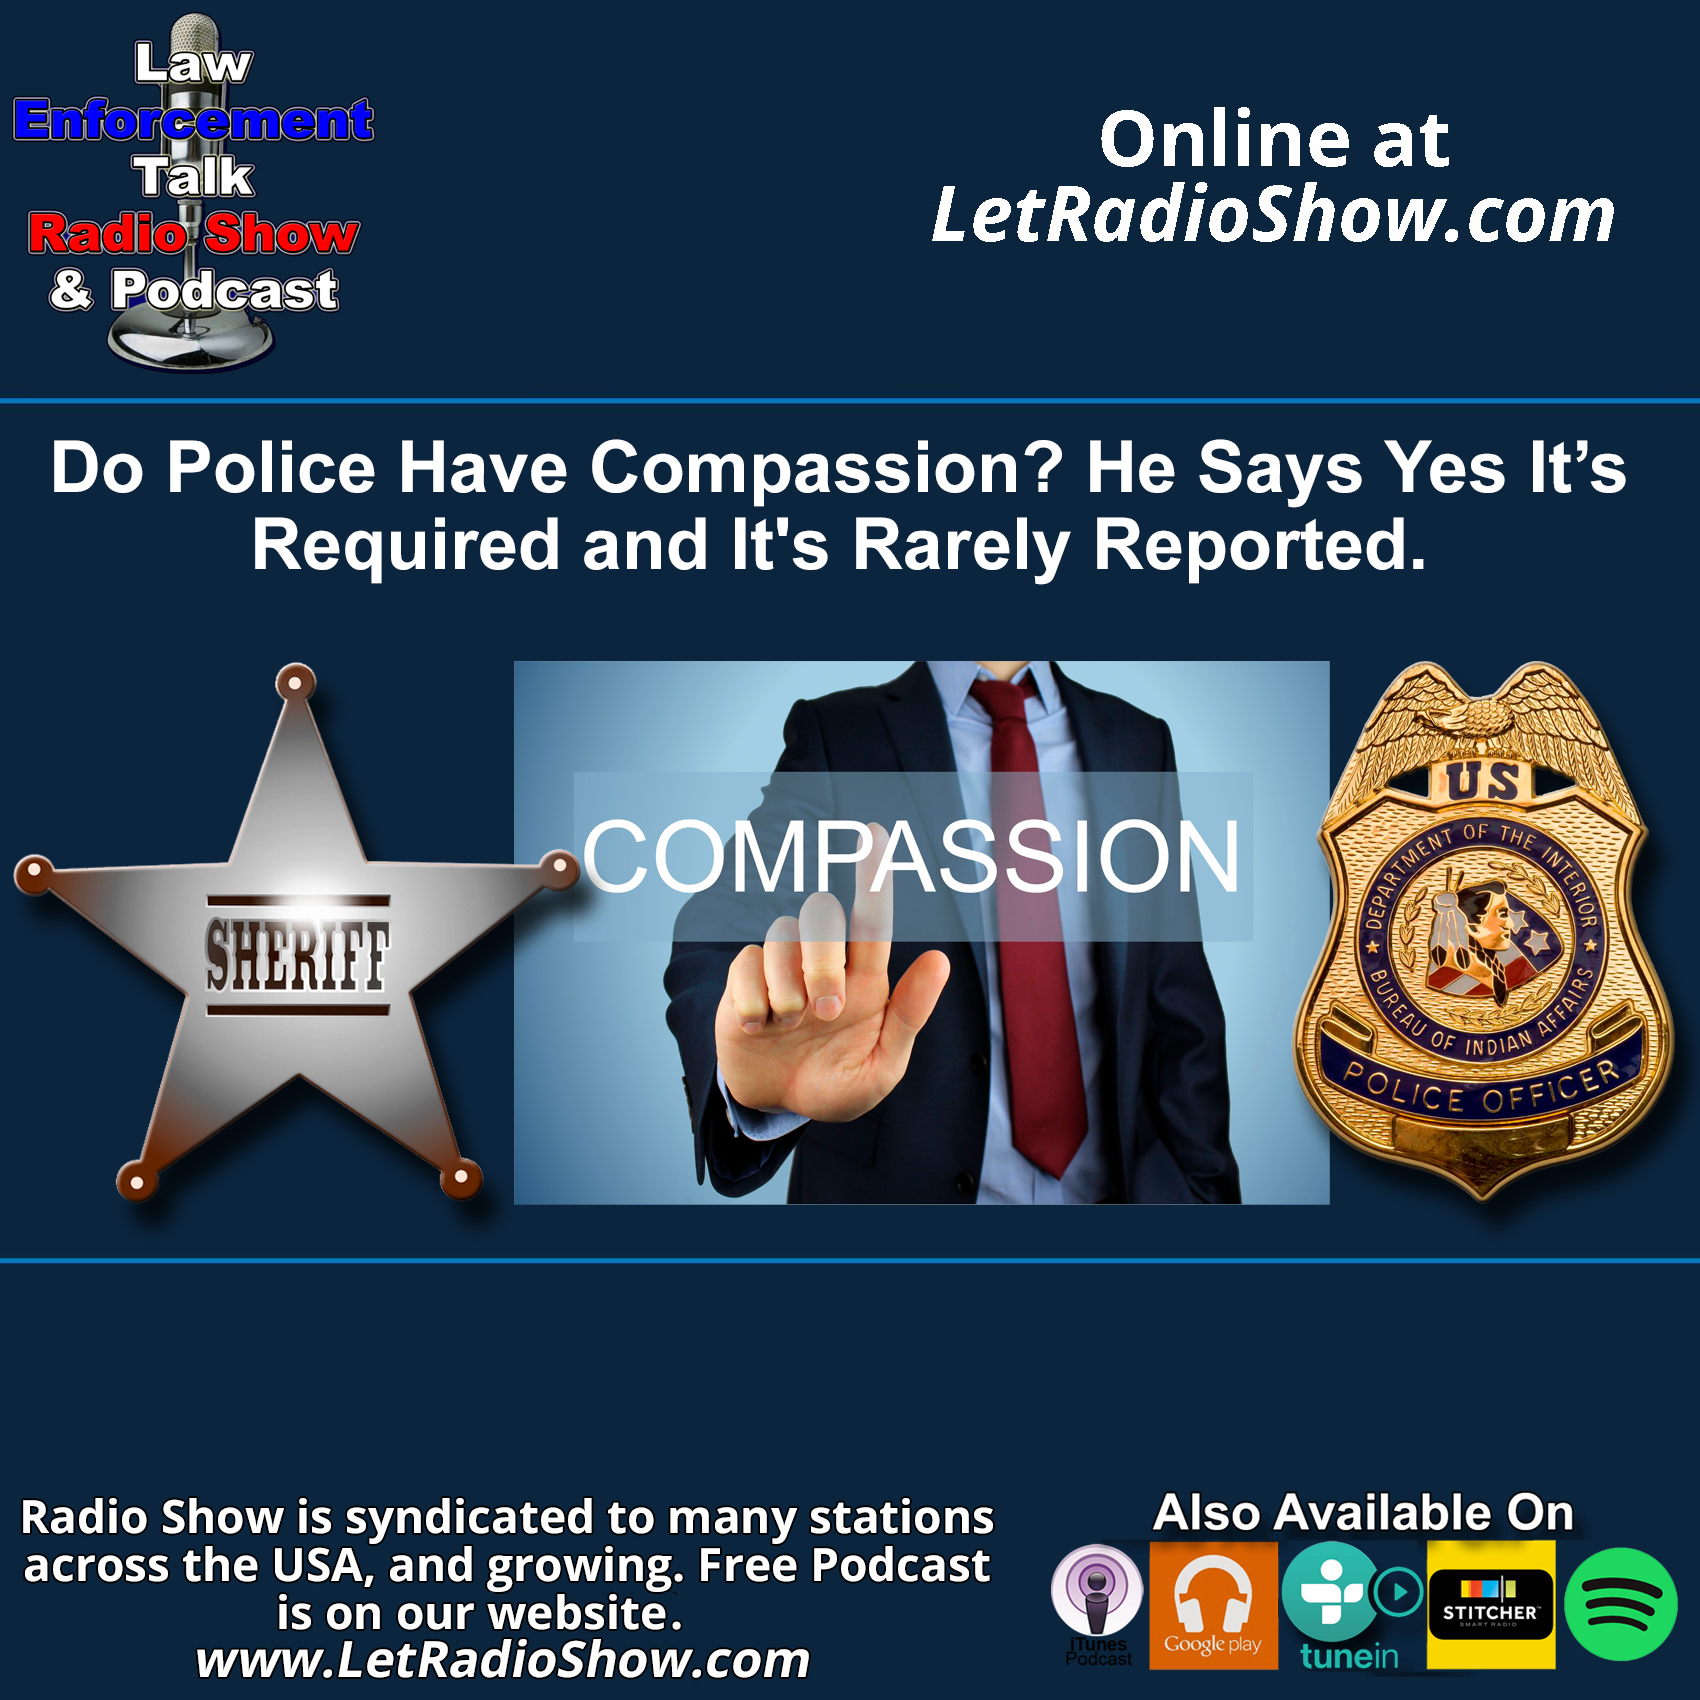 Do Police Have Compassion? Yes, It's Rarely Reported.